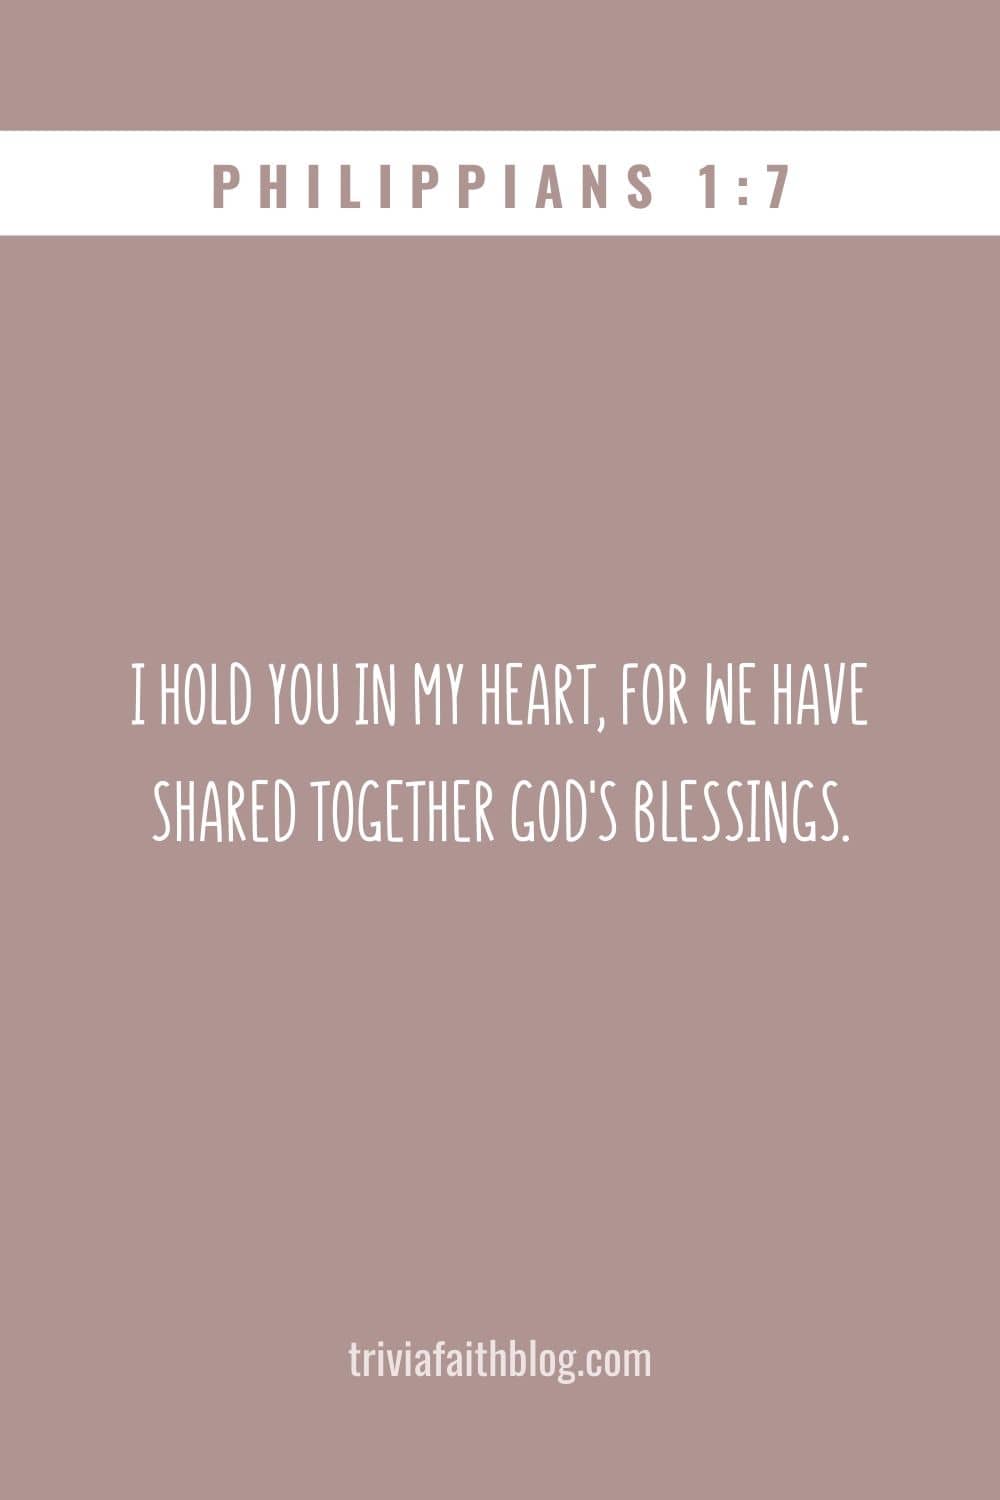 I hold you in my heart, for we have shared together God's blessings